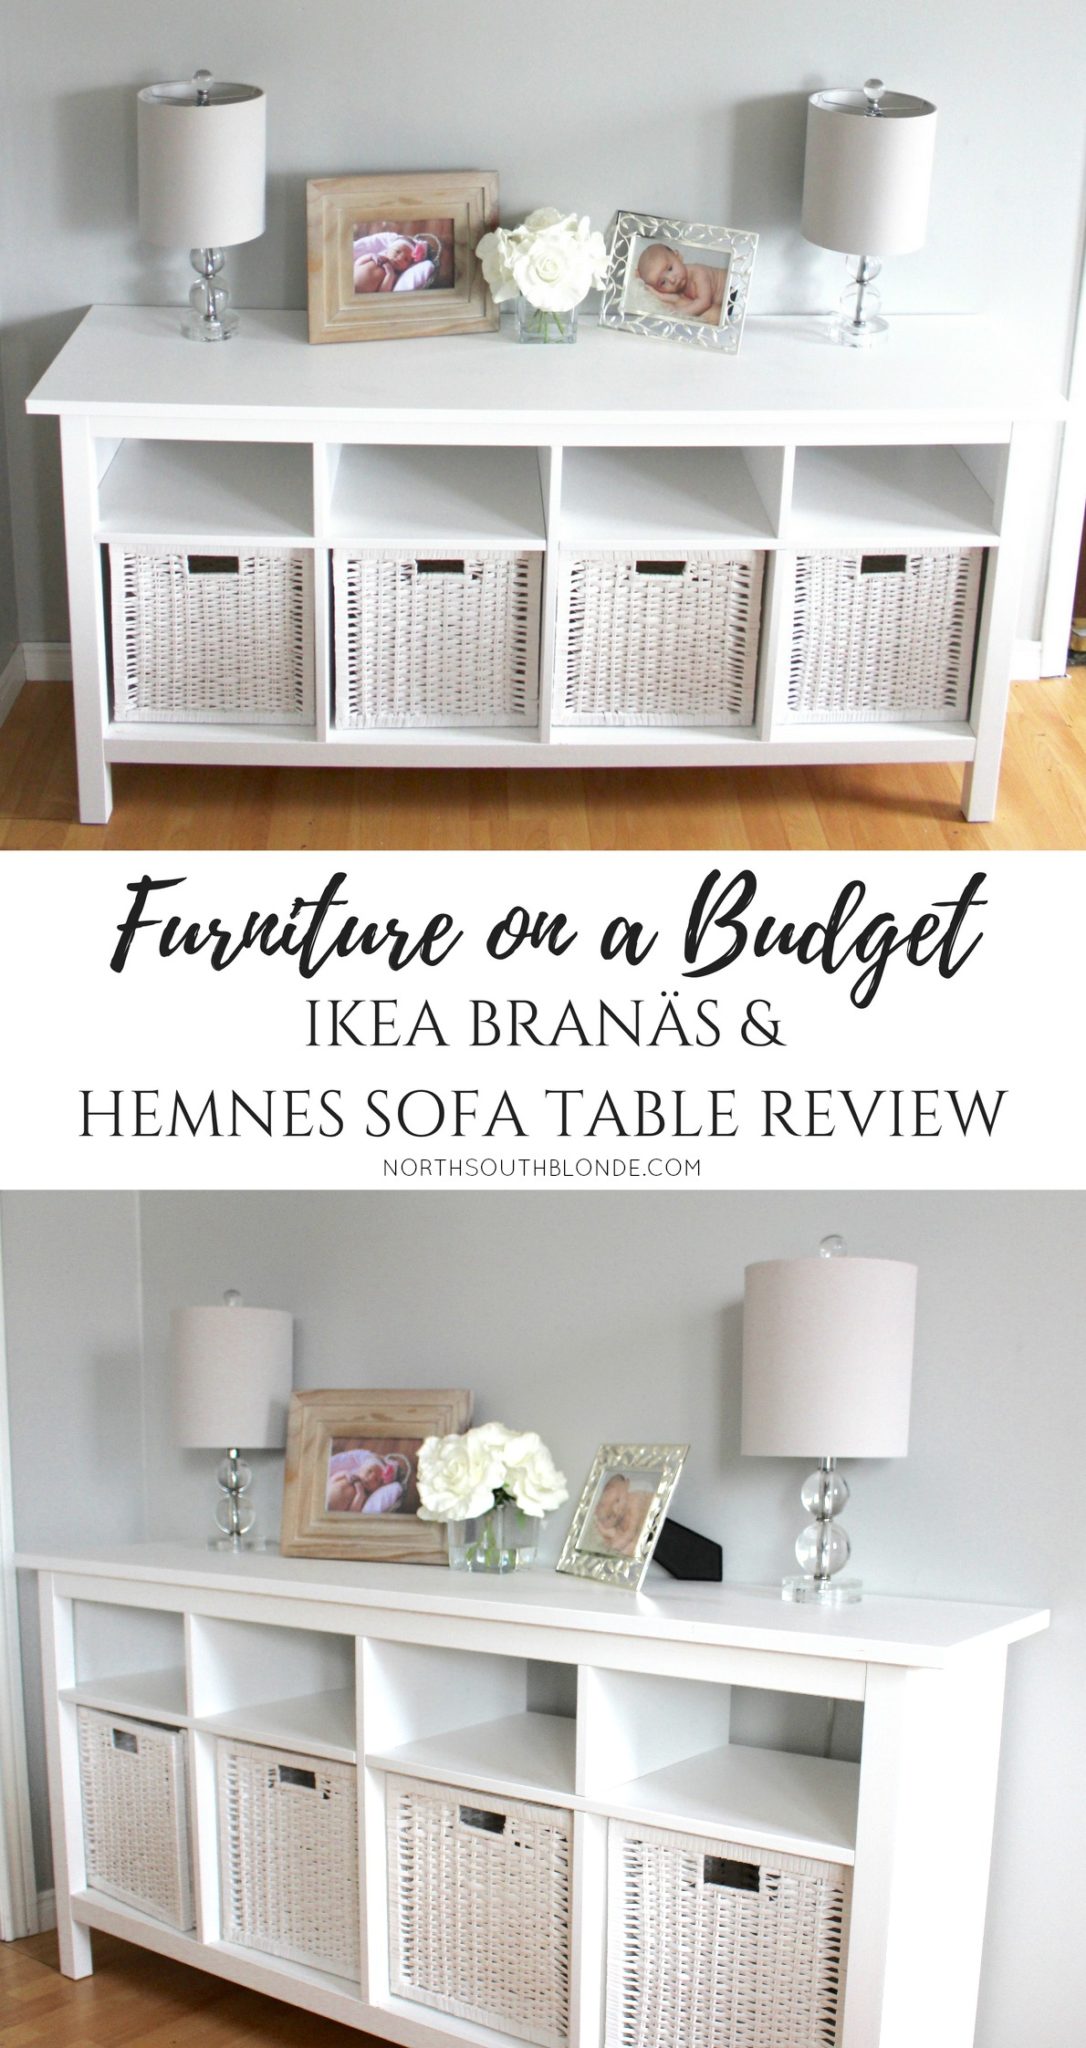 The Hemnes Sofa Table from Ikea is an affordable, beautiful and timeless white piece of furniture that can serve multiple purposes in your home! Buffet Table | Sideboard | Console Table | Media Table | TV Stand | Home Decor | Furniture | Affordable | Ikea Hemnes Console Table | Sofa Table | Branas Baskets | Entryway | Mudroom | Toy Storage | Toy Room Organization | Ikea Review | Dimensions | Basket Size | Measurements | Family Friendly | Mom Approved | Home design | Decor Accents | Side Table |